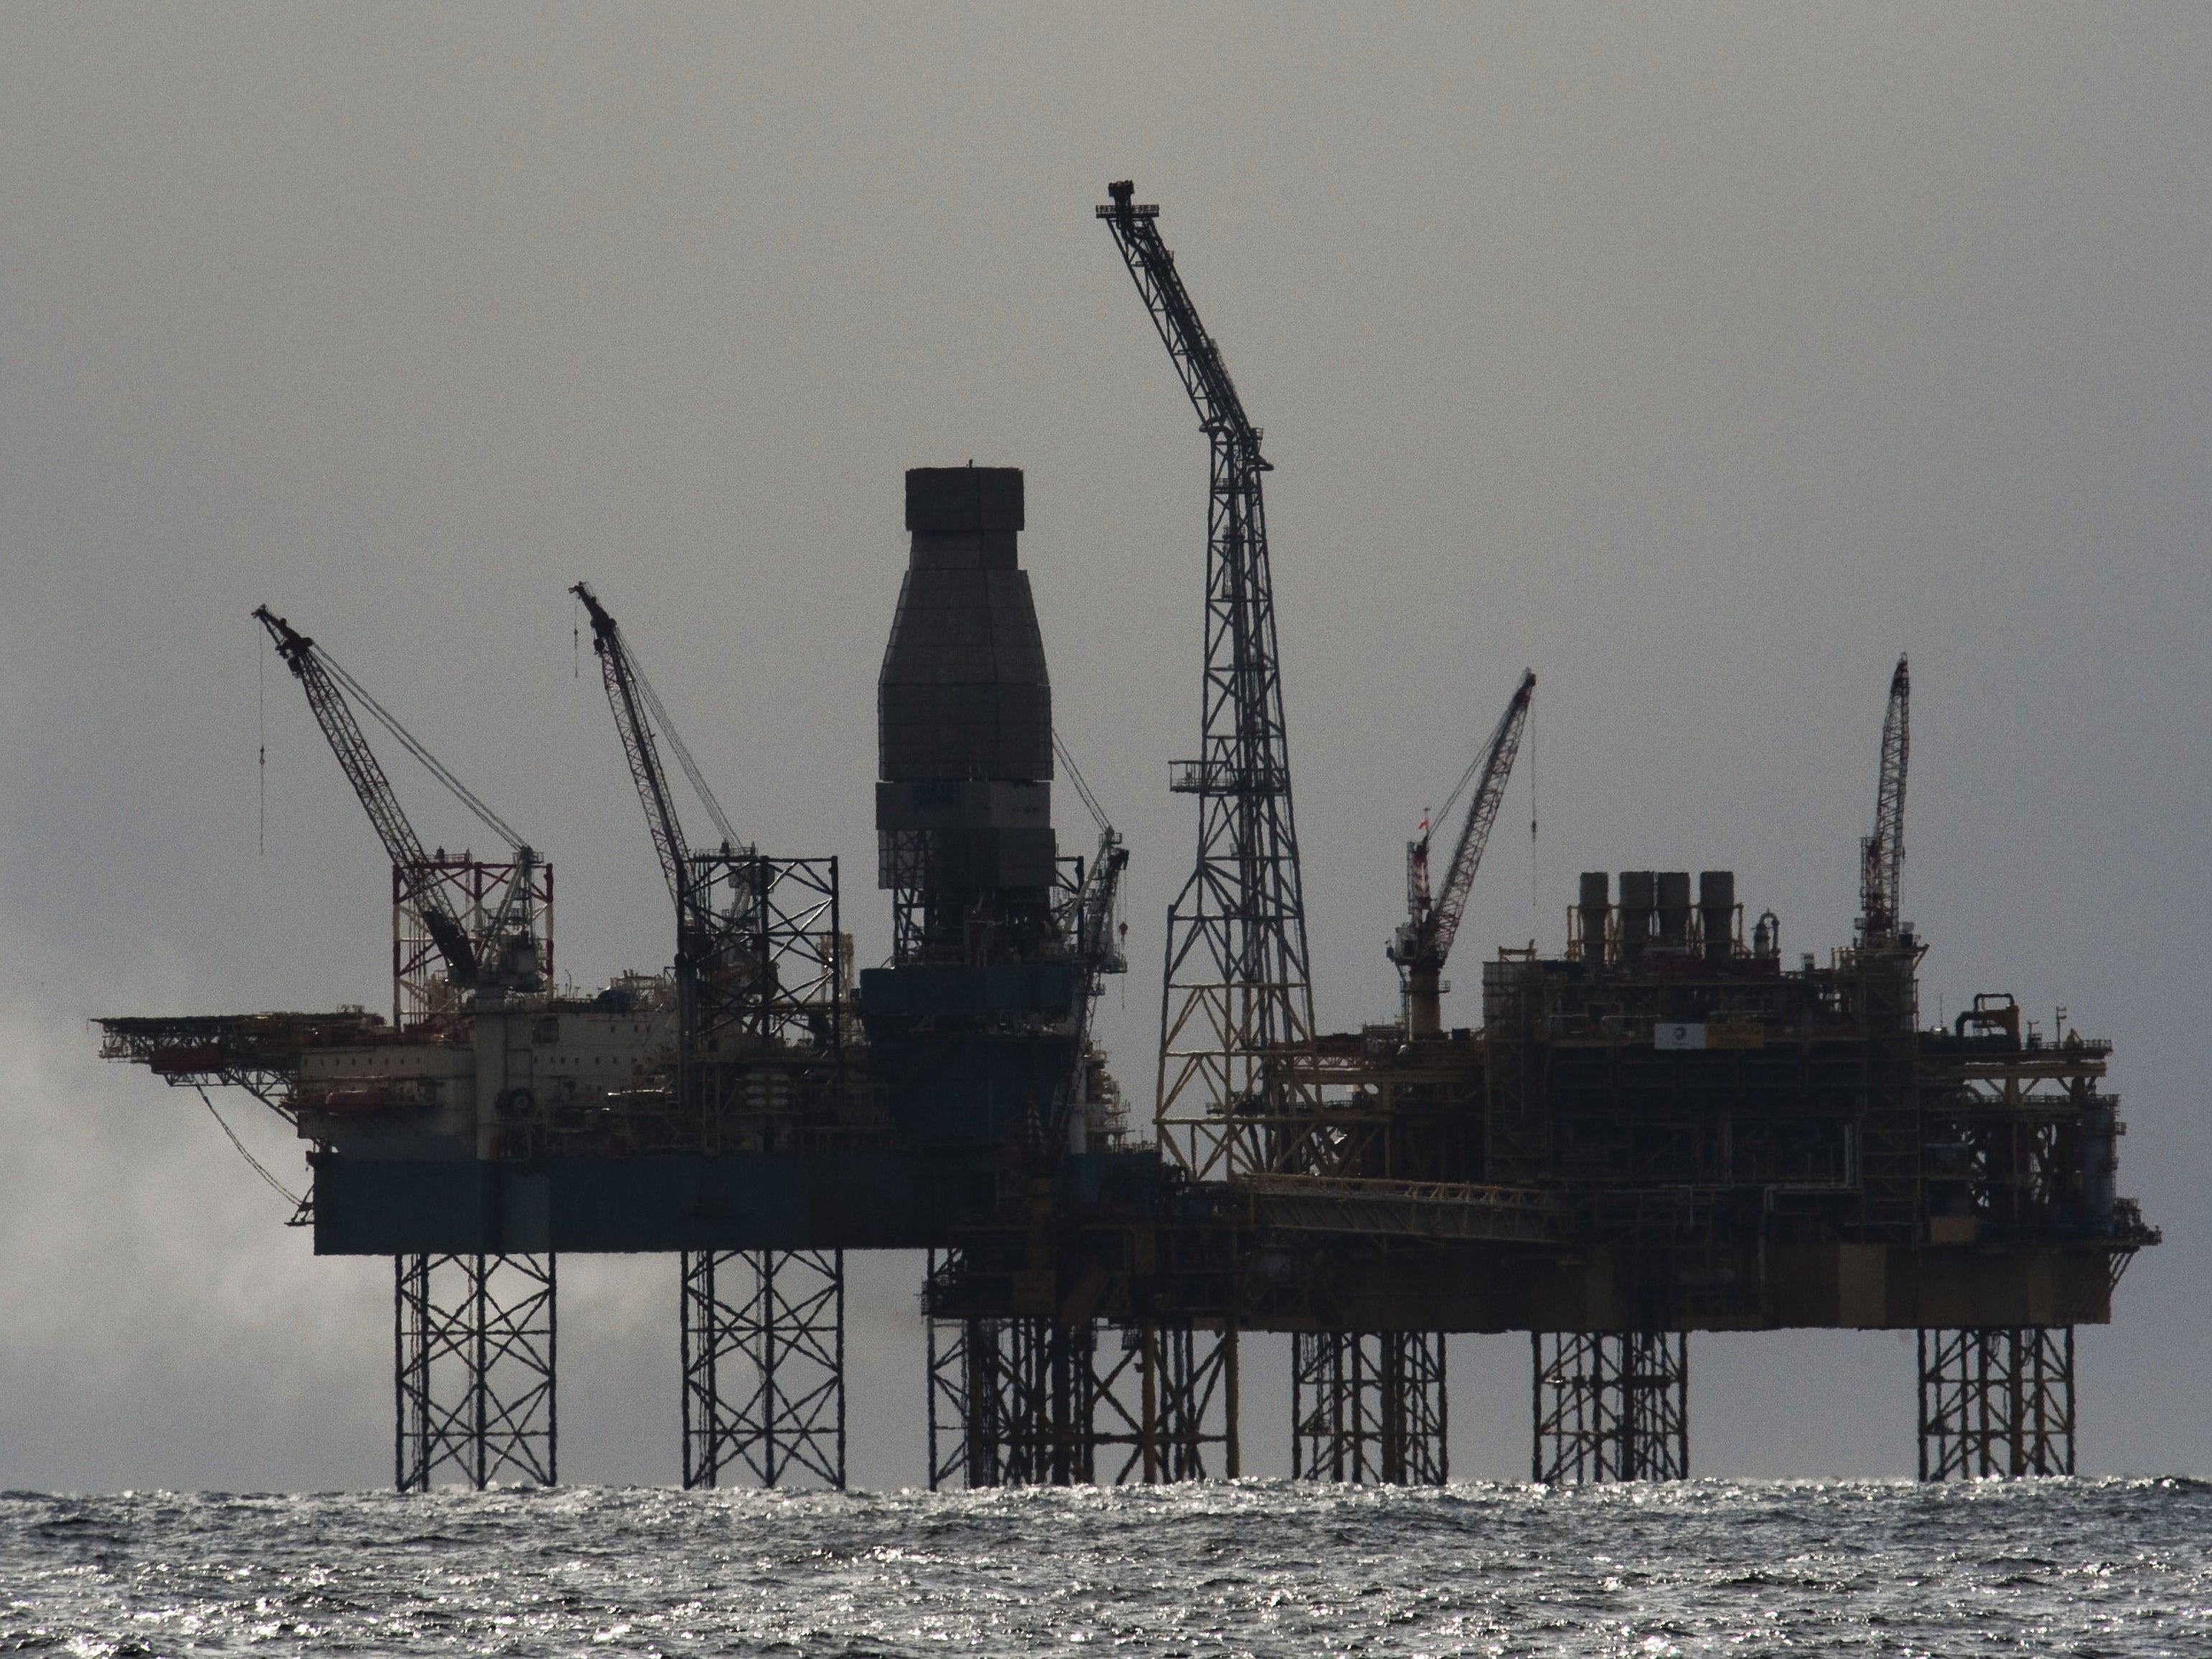 French energy giant Total’s Elgin oil rig in the North Sea off the coast of Aberdeen, Scotland